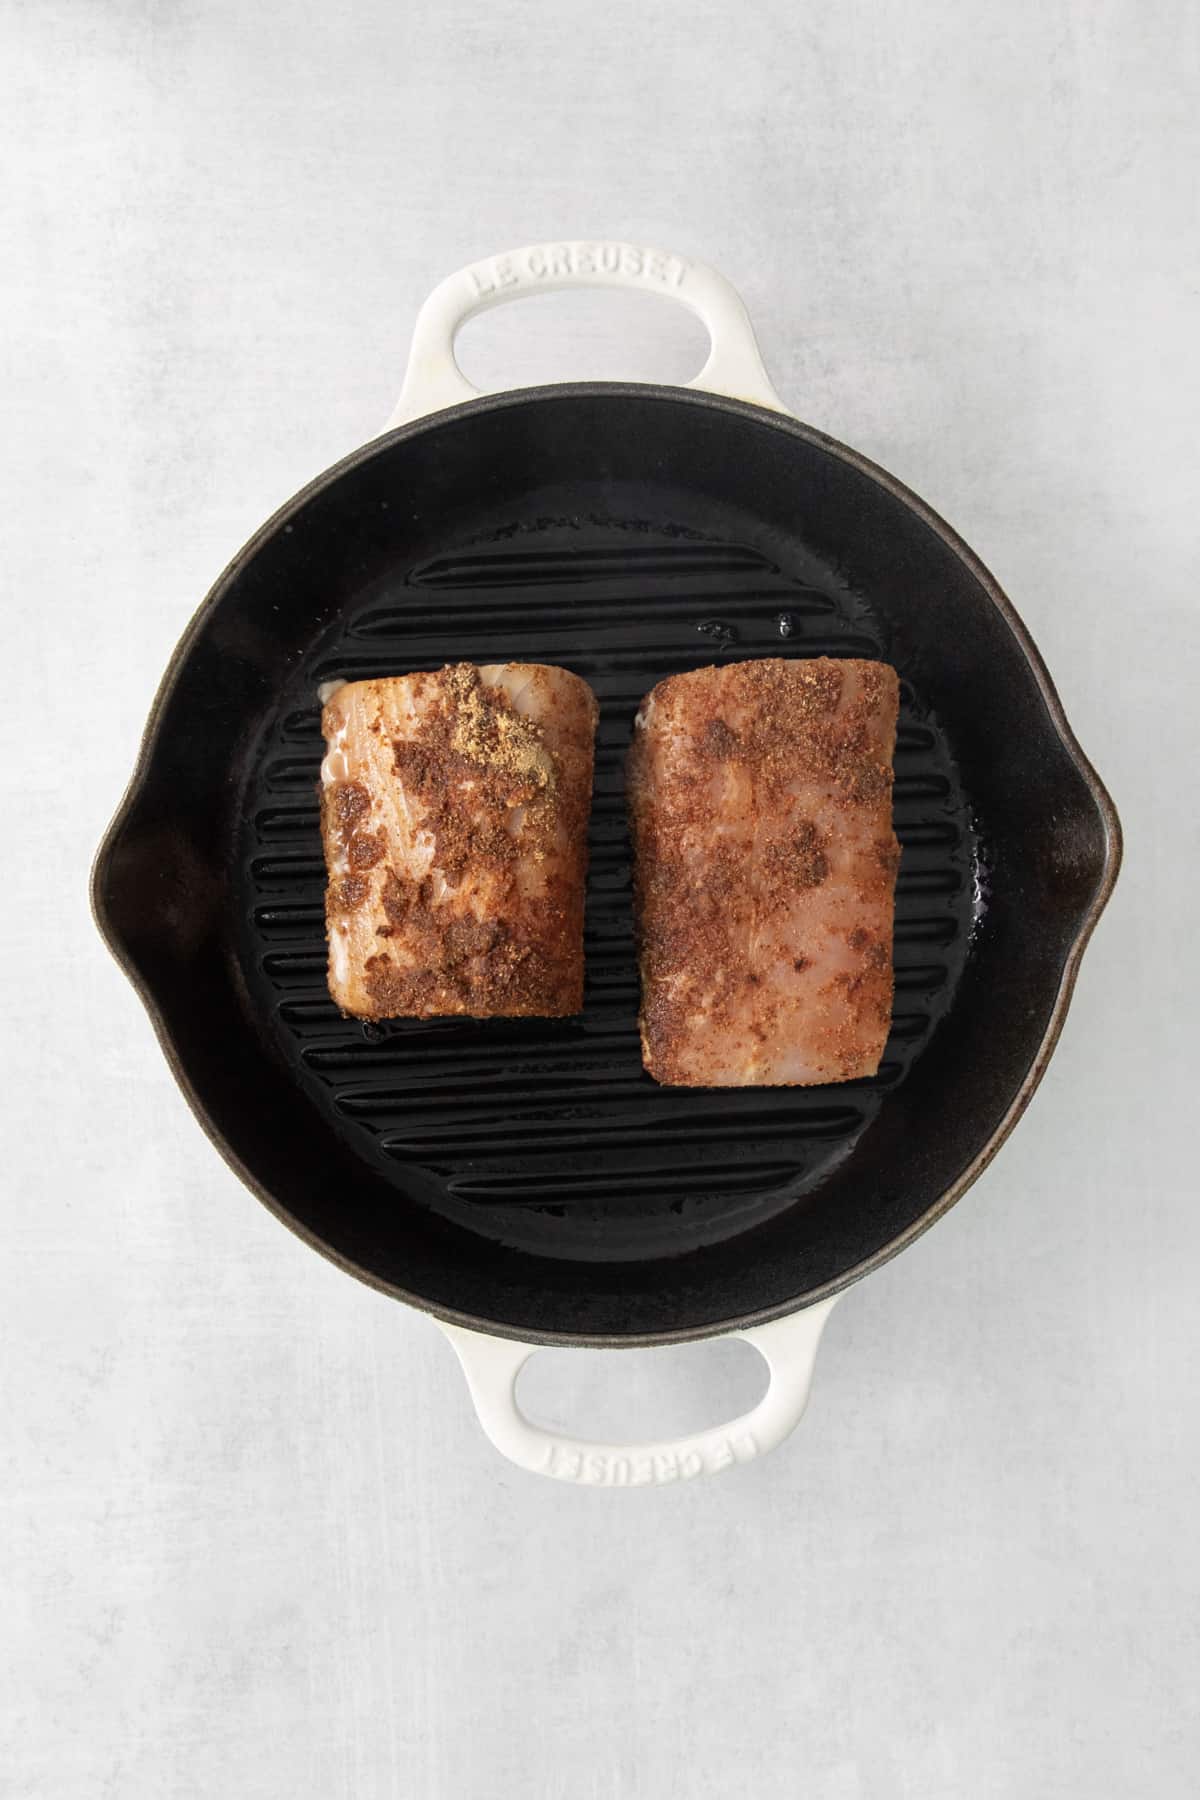 two fish fillets being cooked on a grill pan.